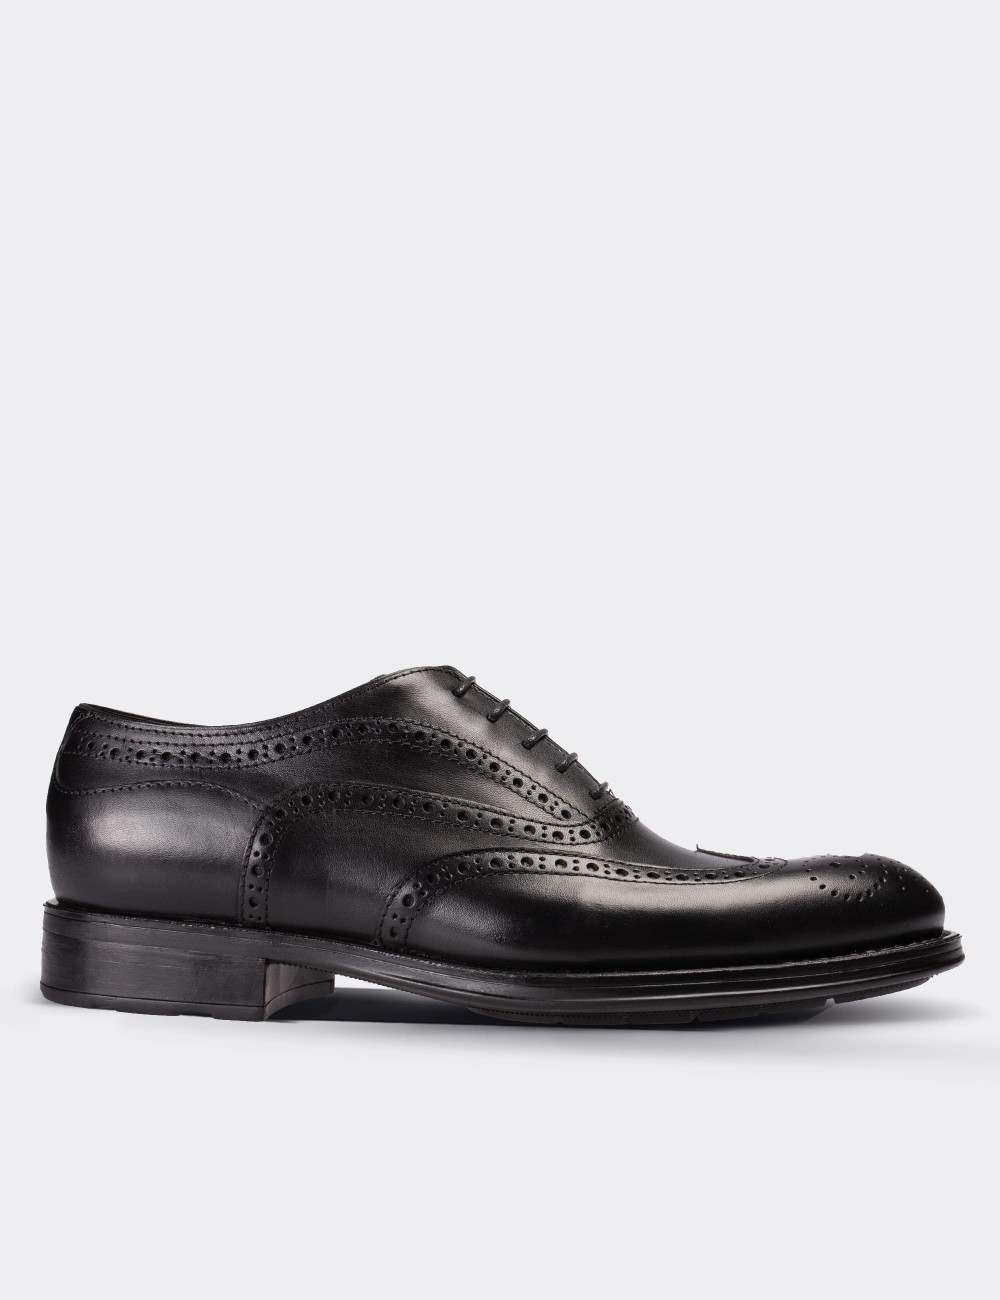 Black  Leather Classic Shoes - 01511MSYHC02